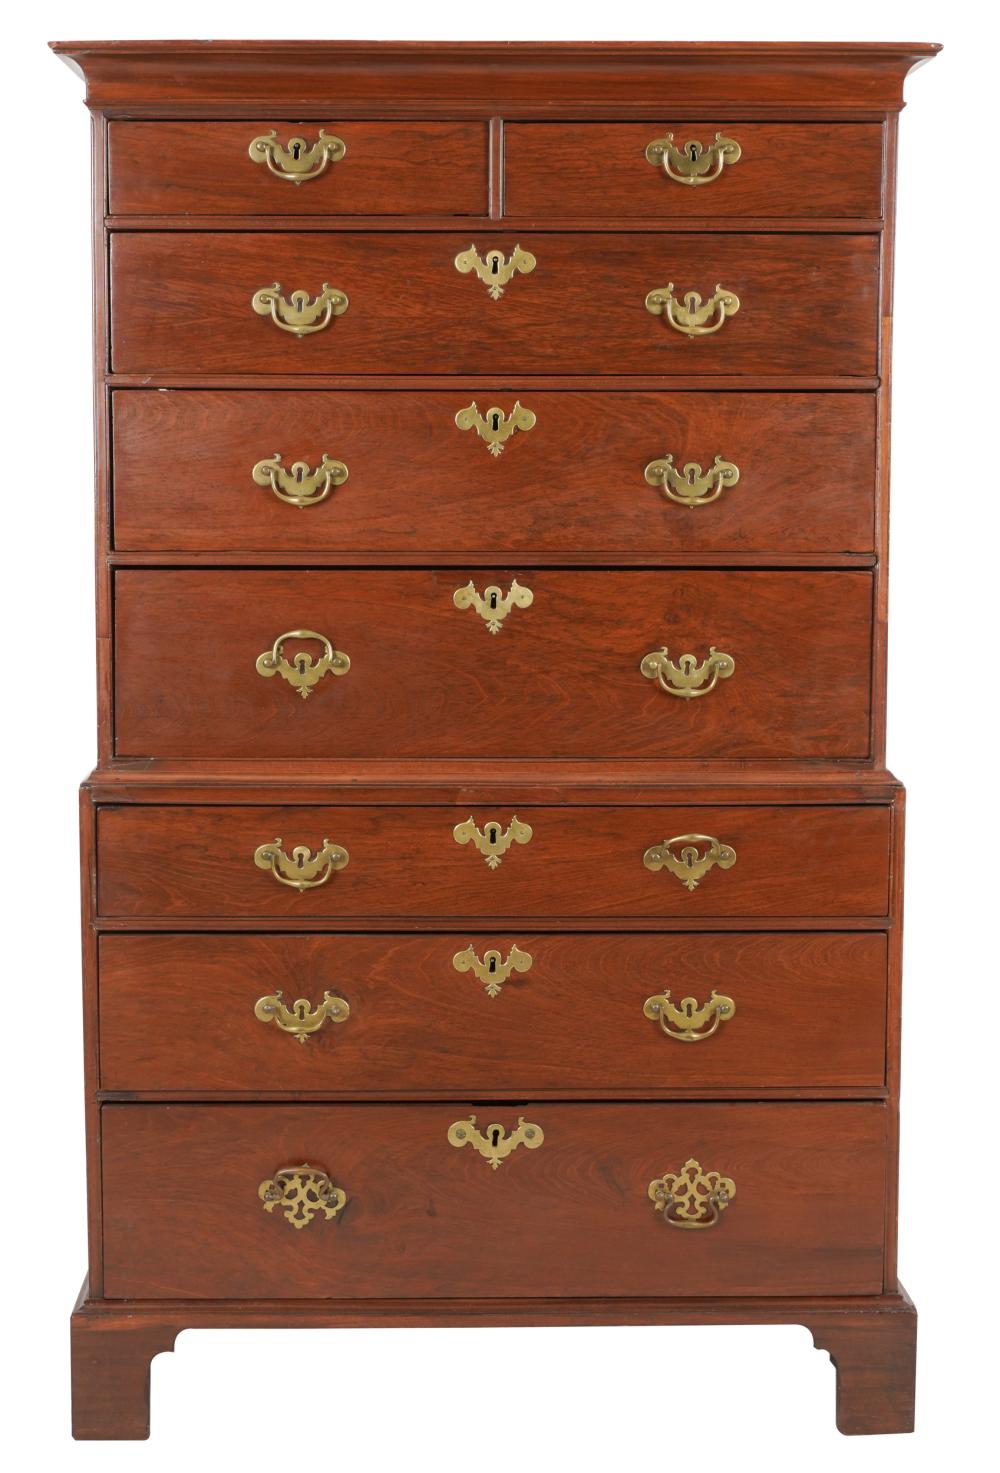 CHIPPENDALE STYLE MAHOGANY CHEST 331009